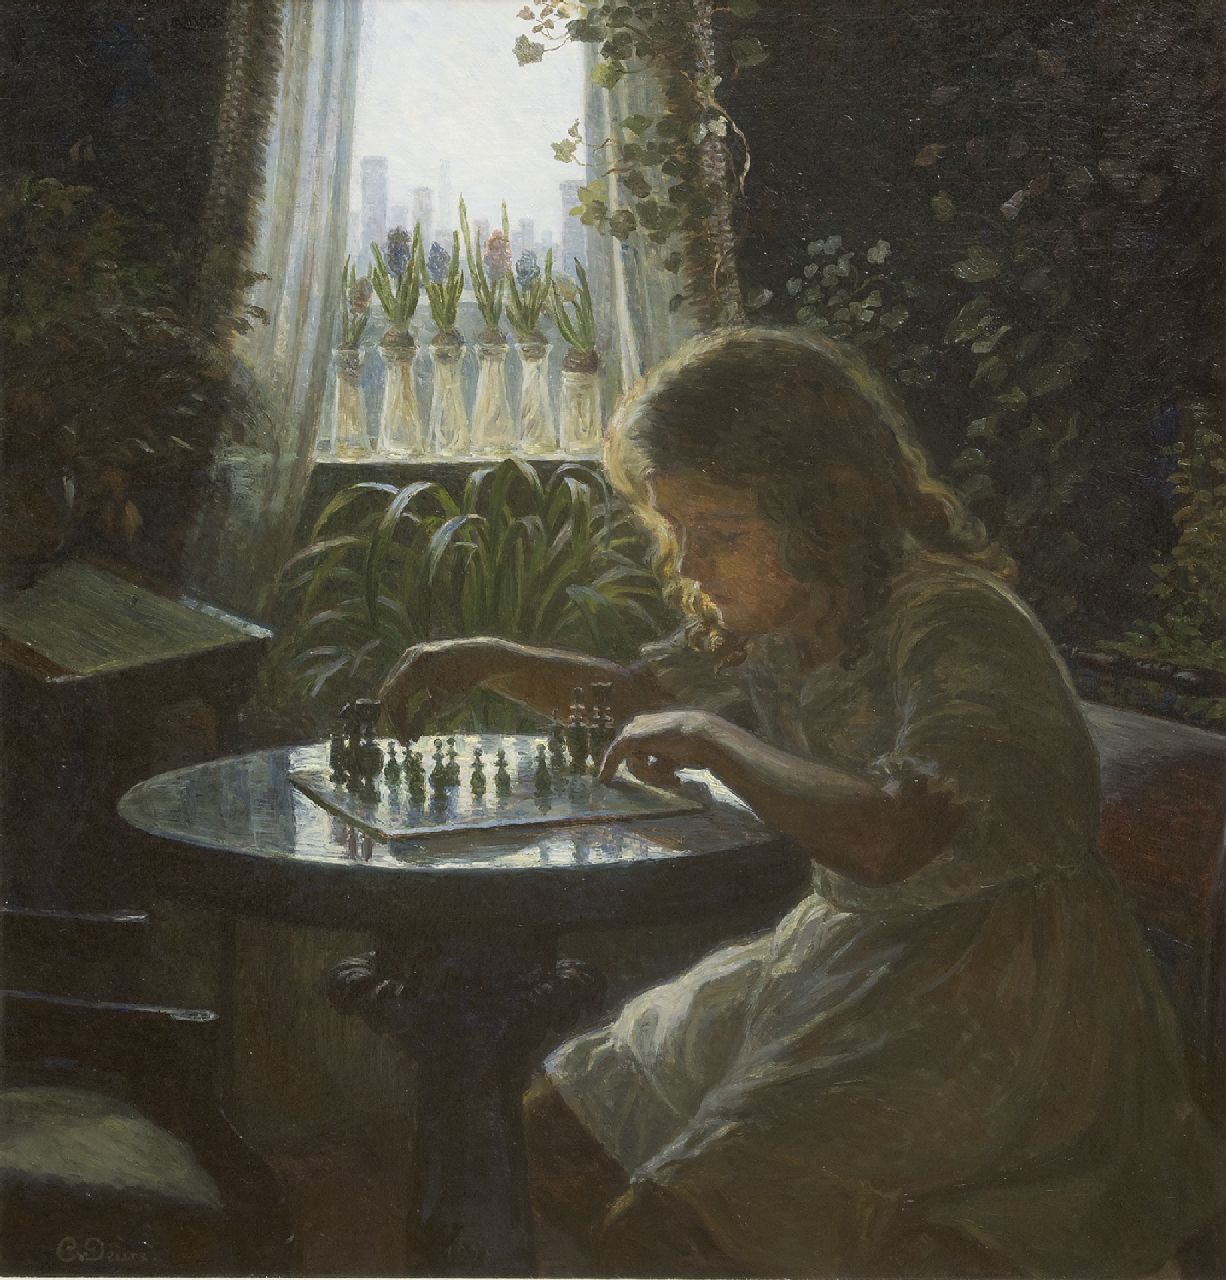 Caroline van Deurs | The young chess player, oil on canvas, 63.5 x 59.5 cm, signed l.l.